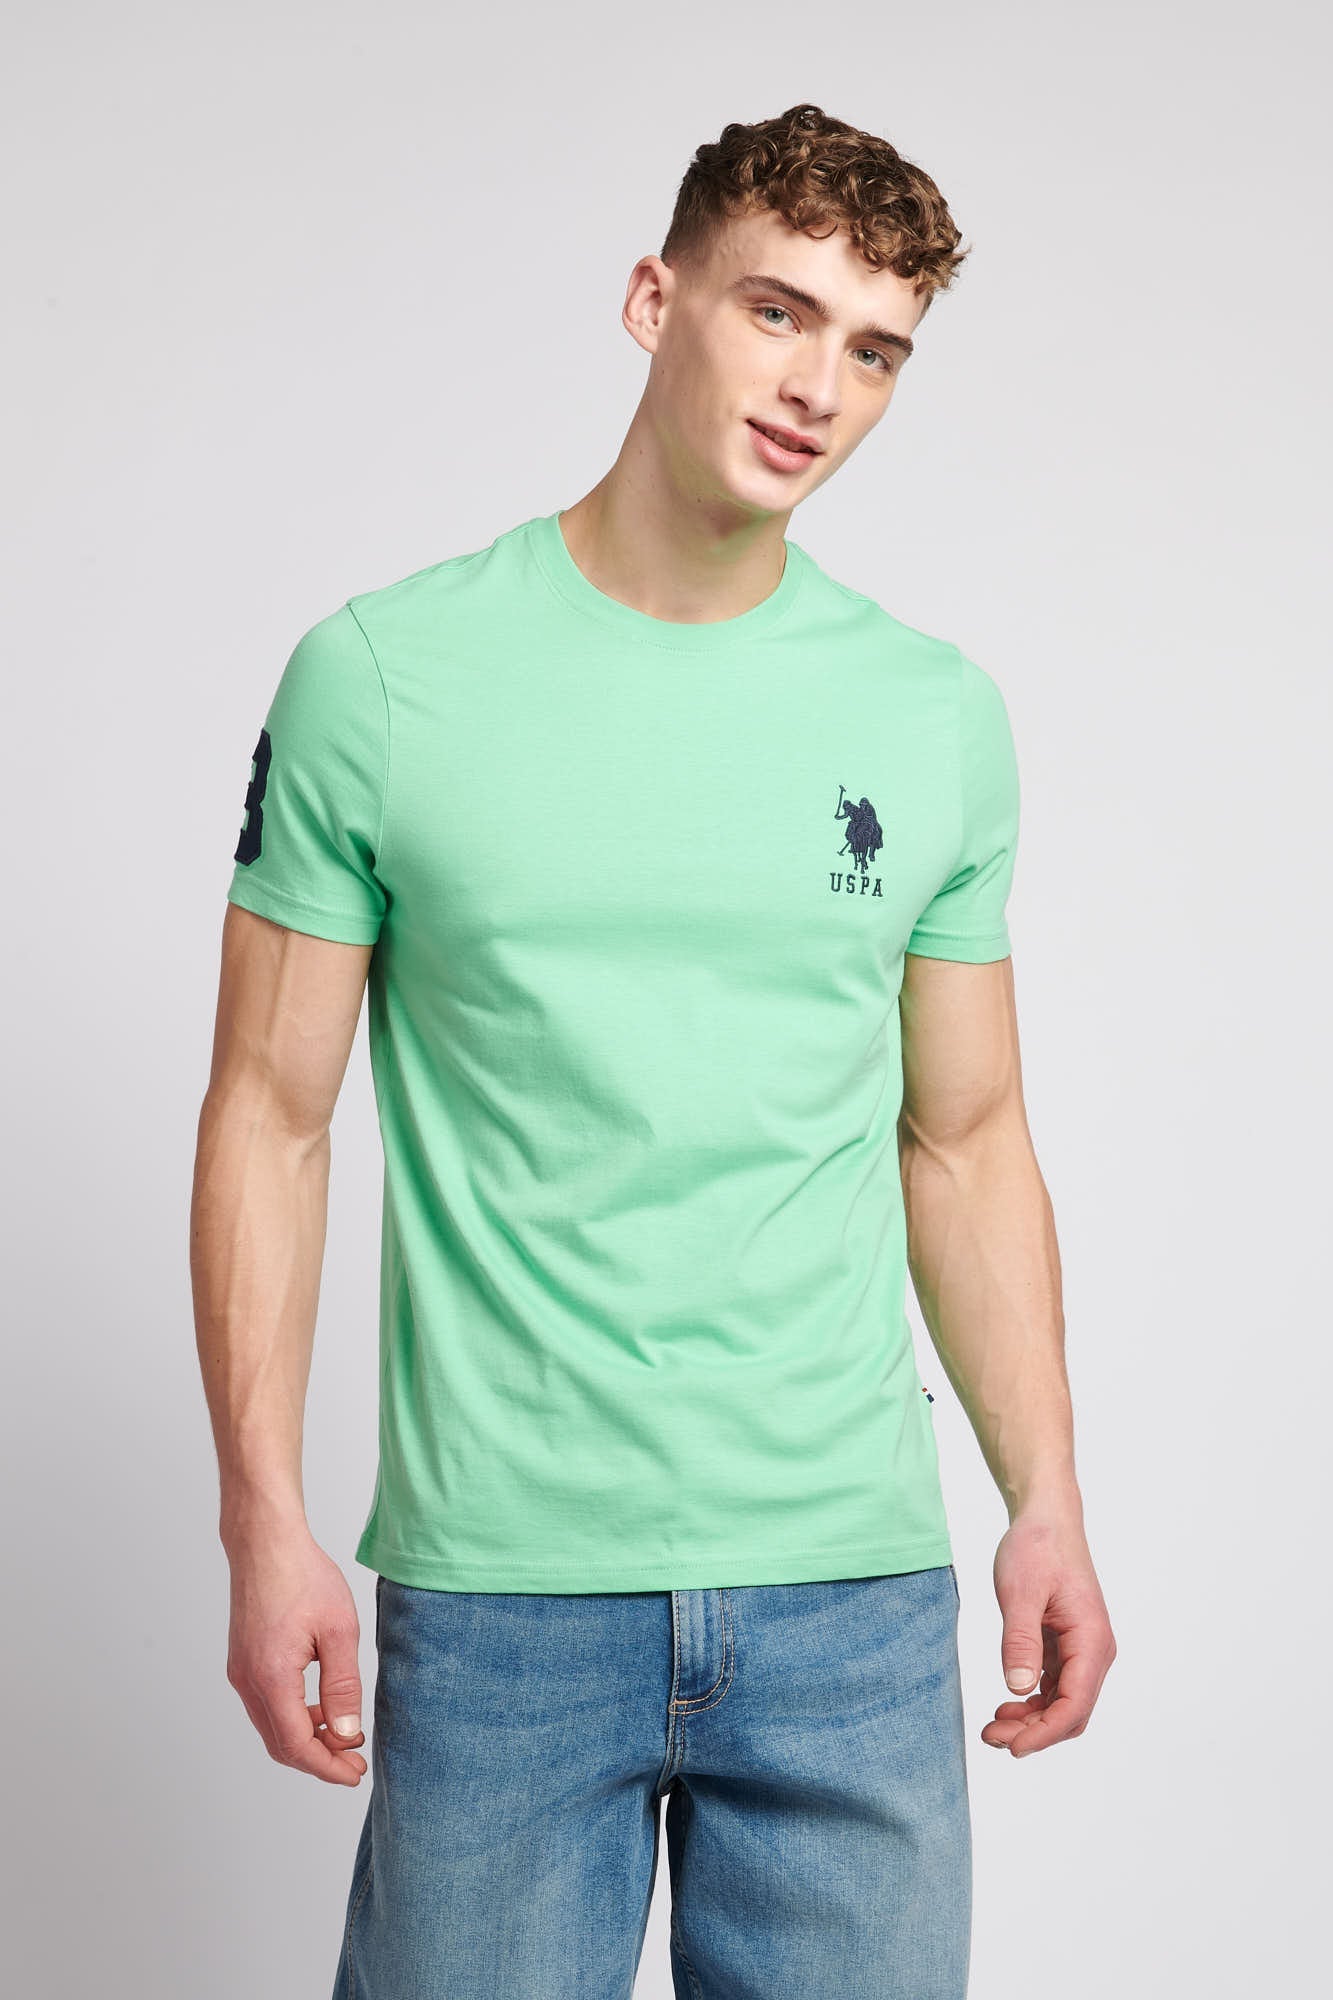 U.S. Polo Assn. Mens Player 3 T-Shirt in Spring Bud